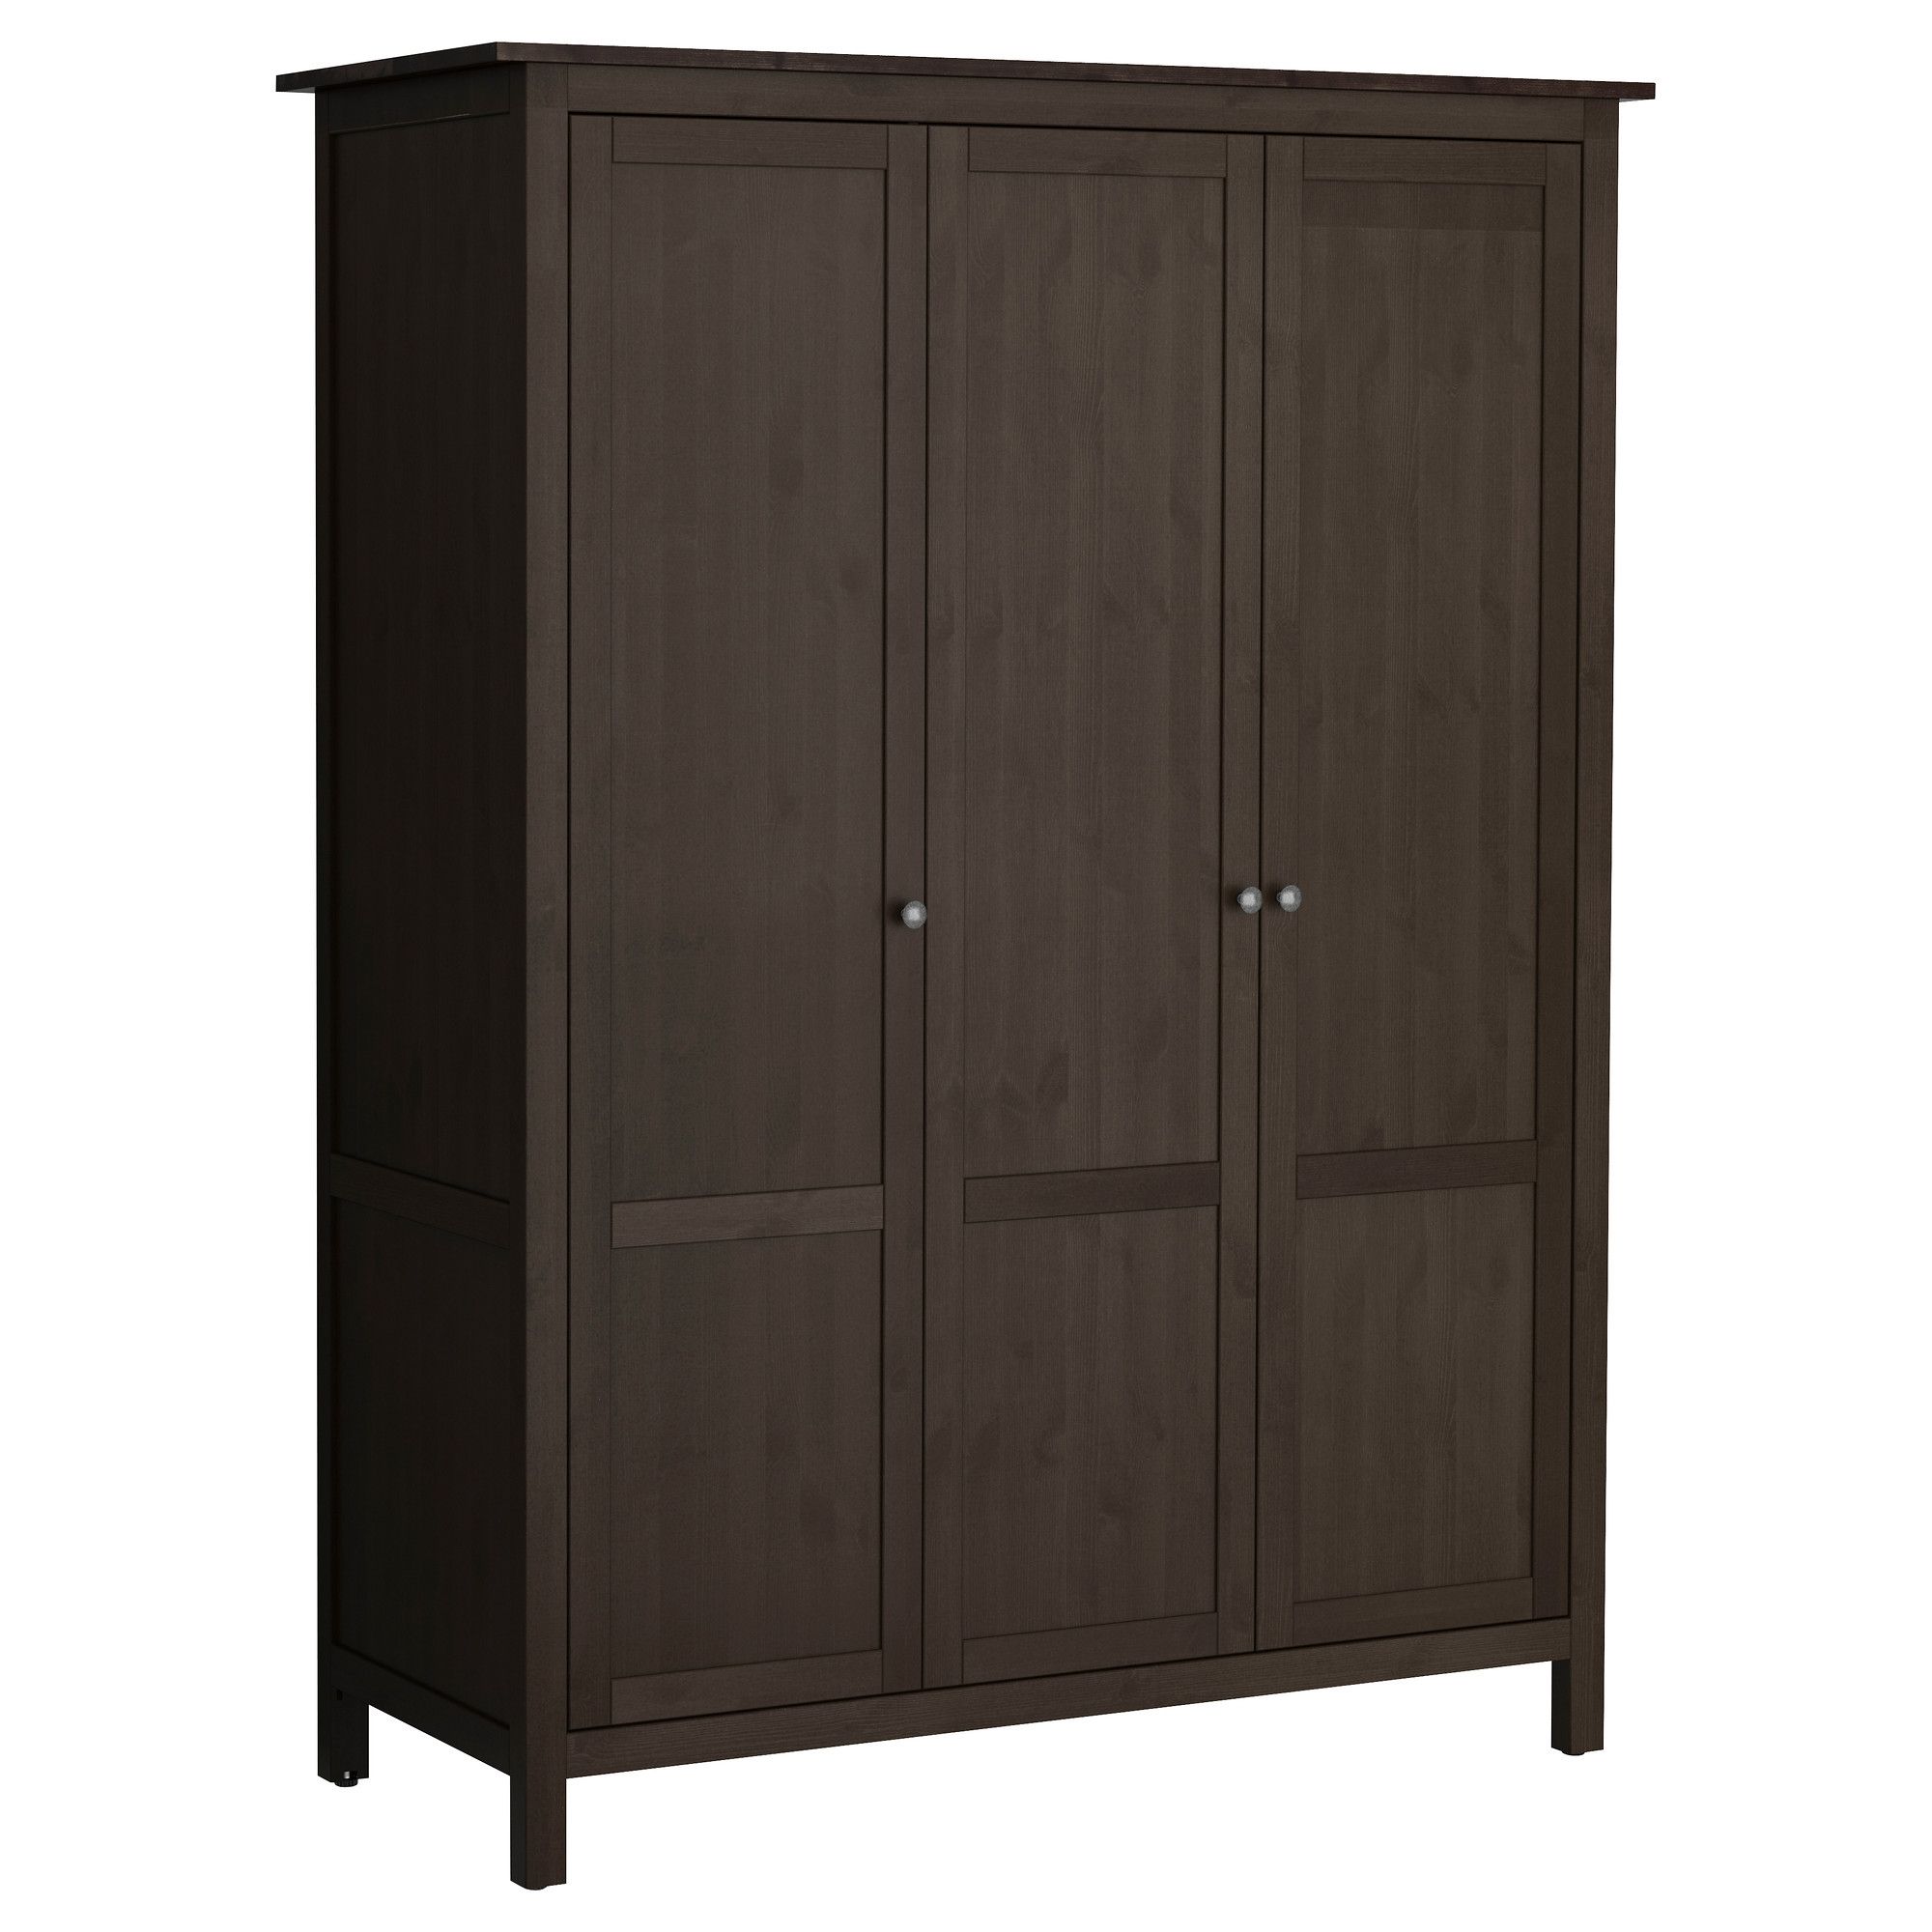 Widely Used Hemnes Wardrobe With 3 Doors – Black Brown – Ikea This Might Work With Regard To 3 Door Black Wardrobes (View 15 of 15)